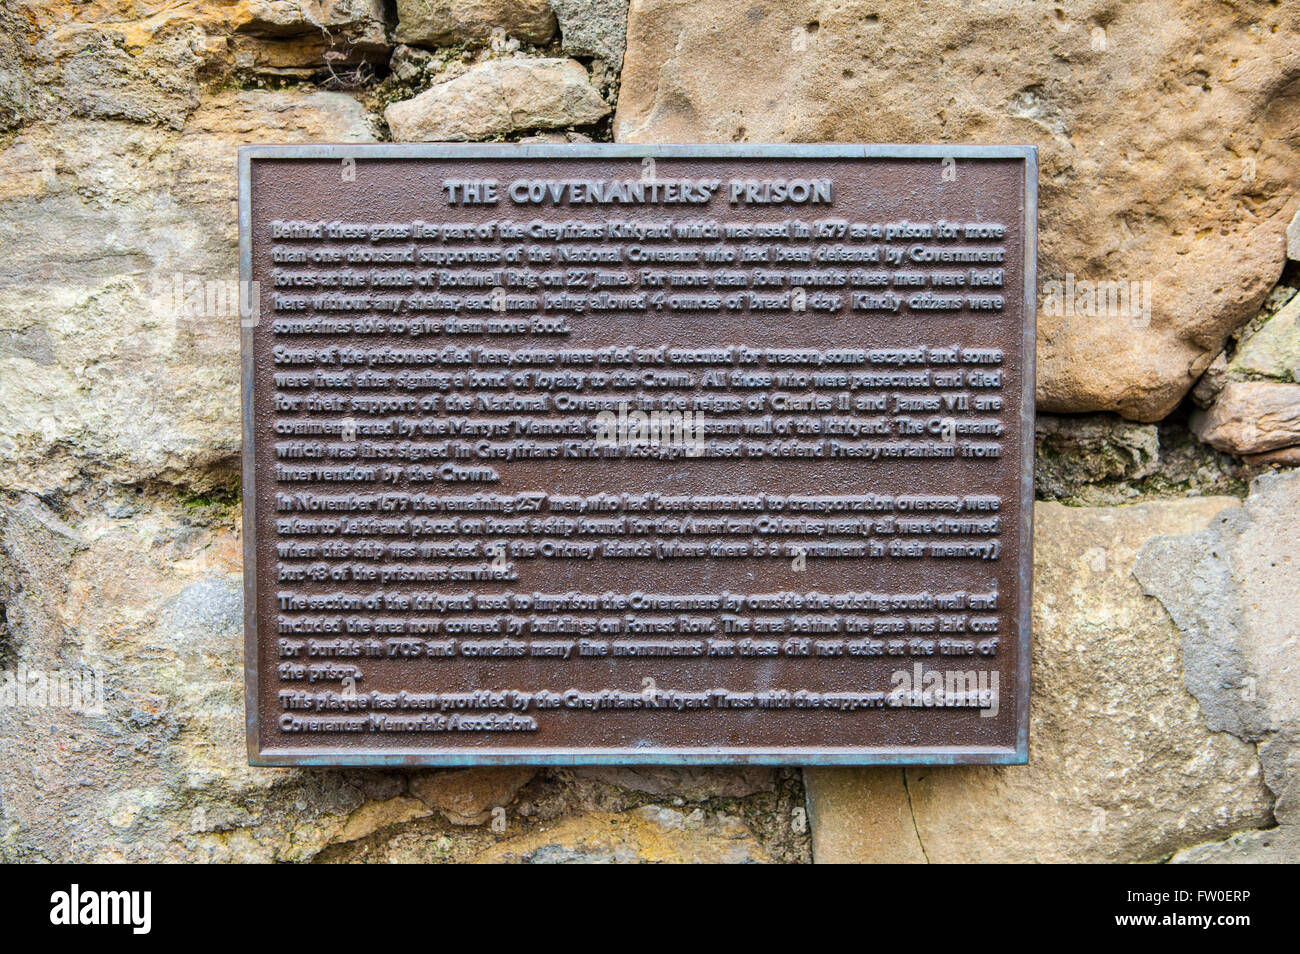 A plaque detailing the location of the Covenanters Prison in Greyfriars Churchyard in Edinburgh. Stock Photo